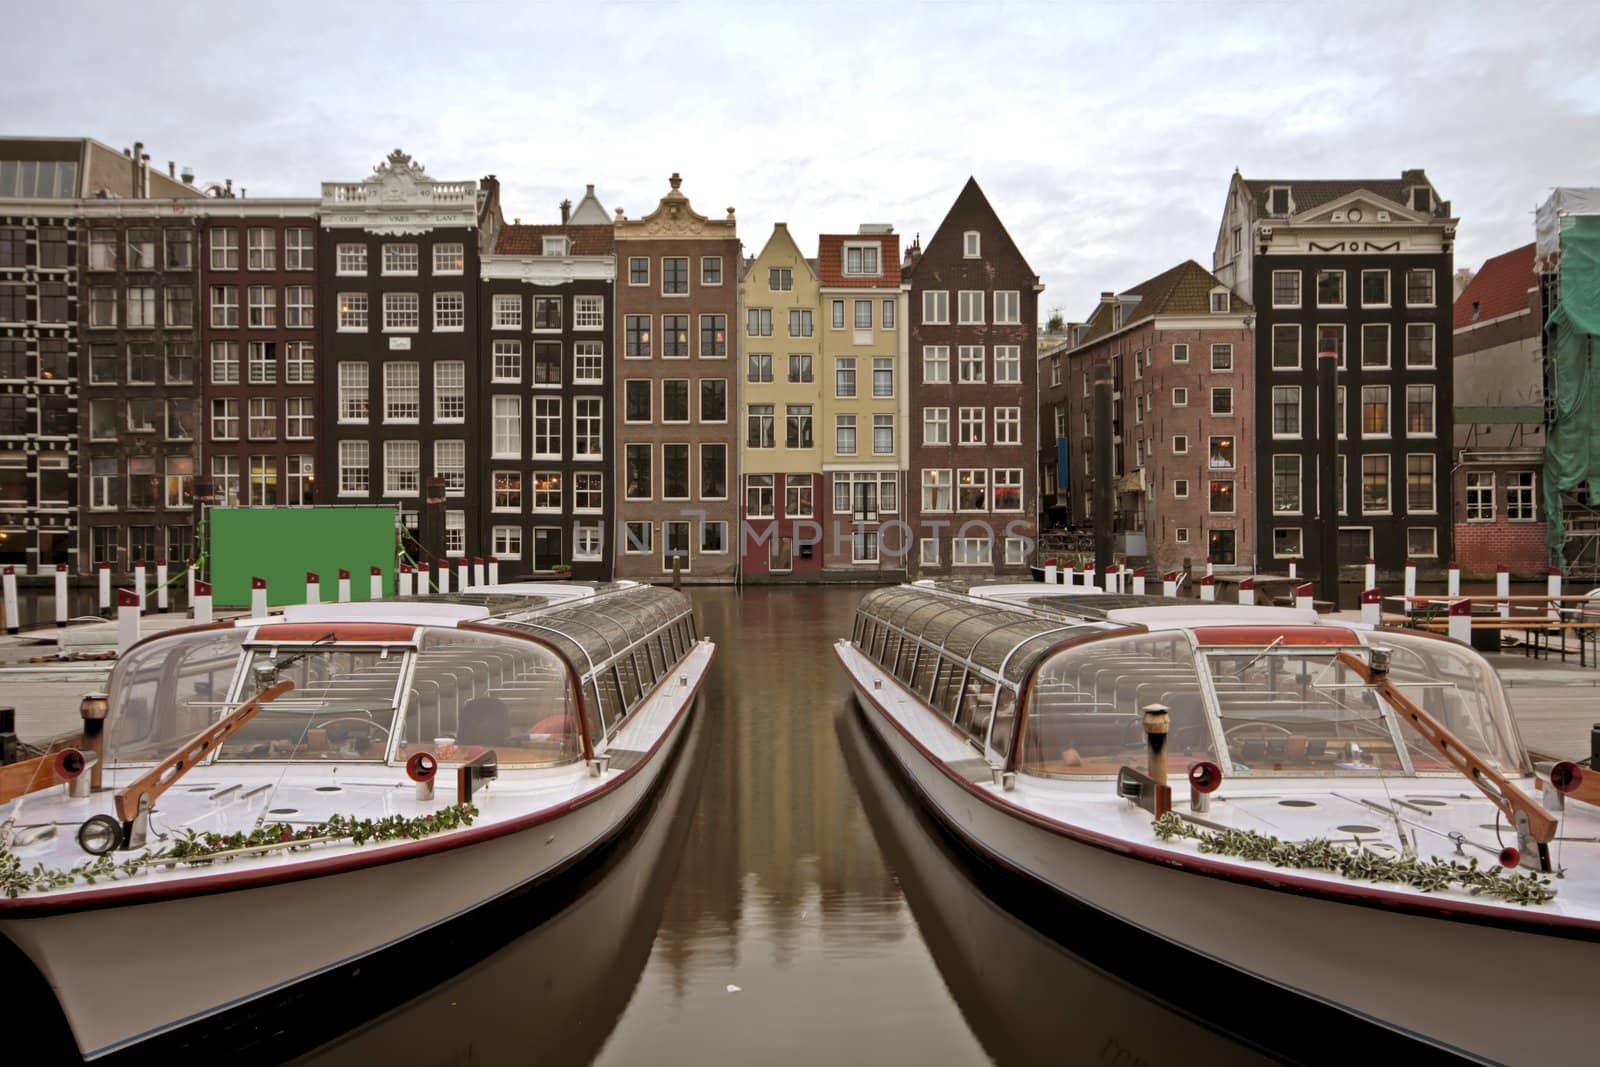 Amsterdam houses and cruise boats in the Netherlands   by devy